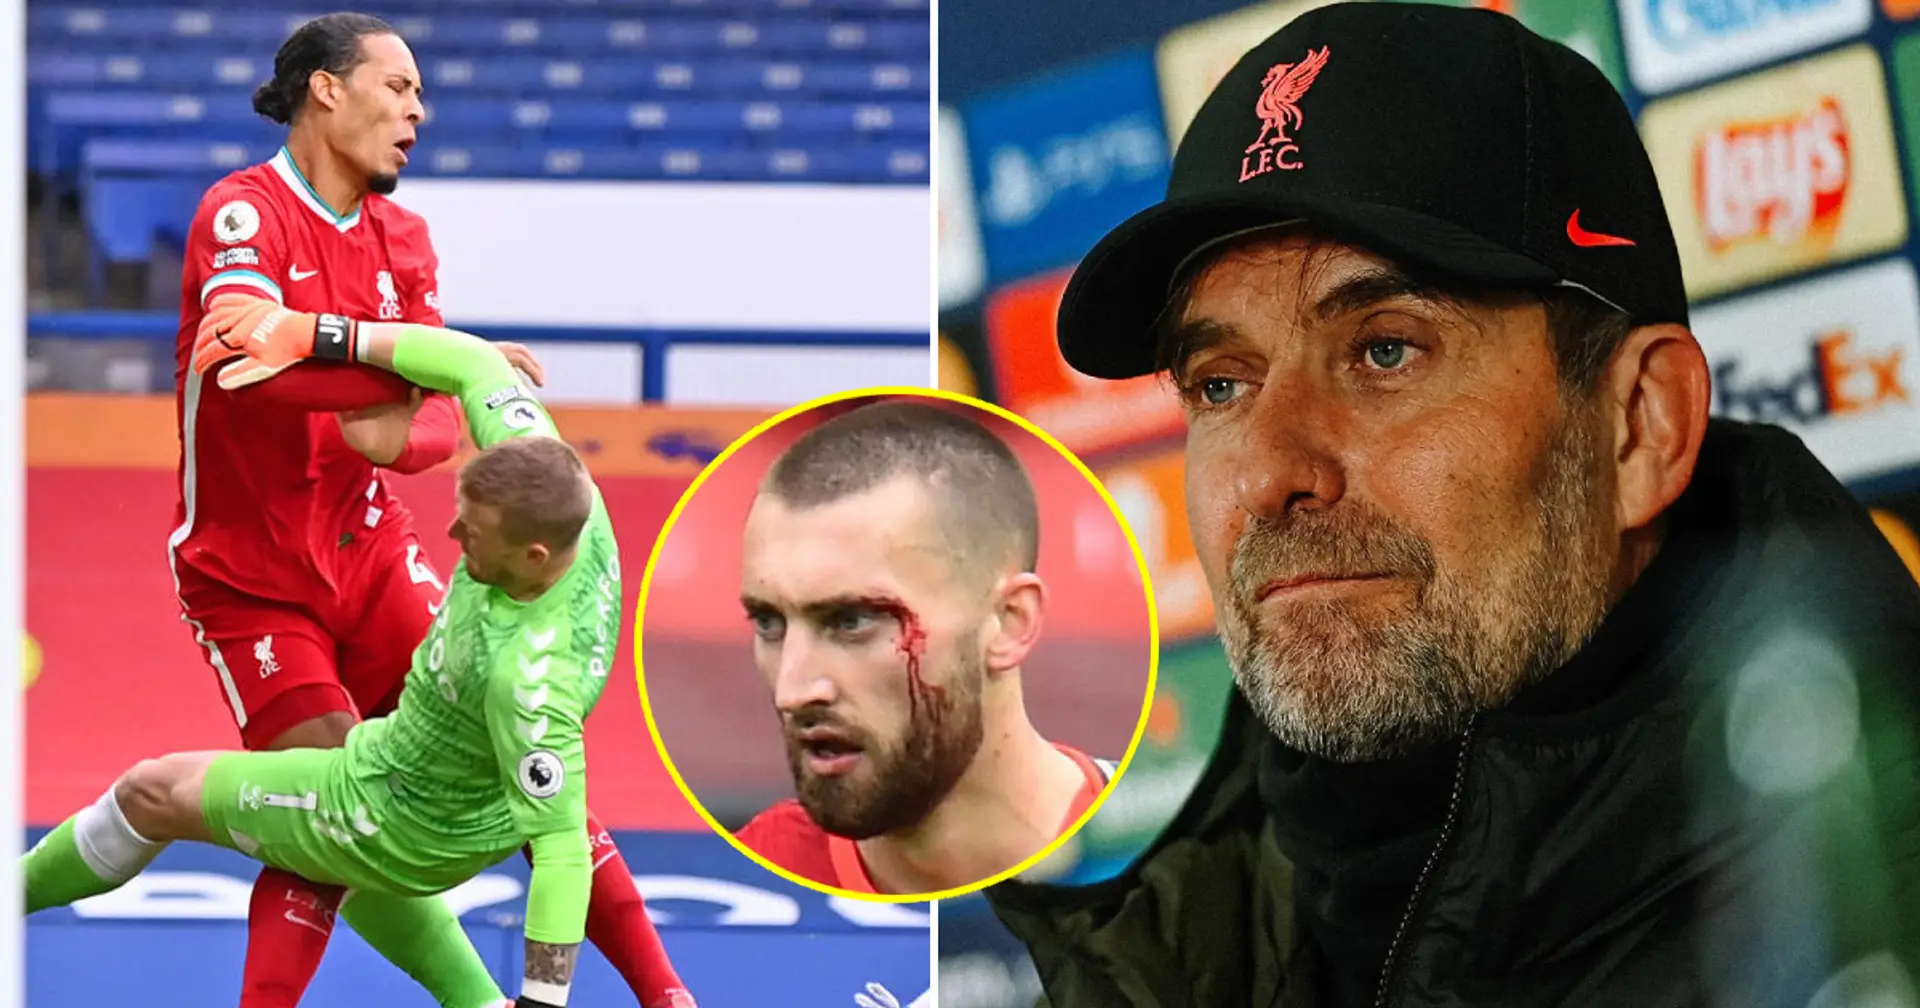 'Wouldn't even be here without them': Liverpool fan names two 'smaller' players in run-up to Champions League semis